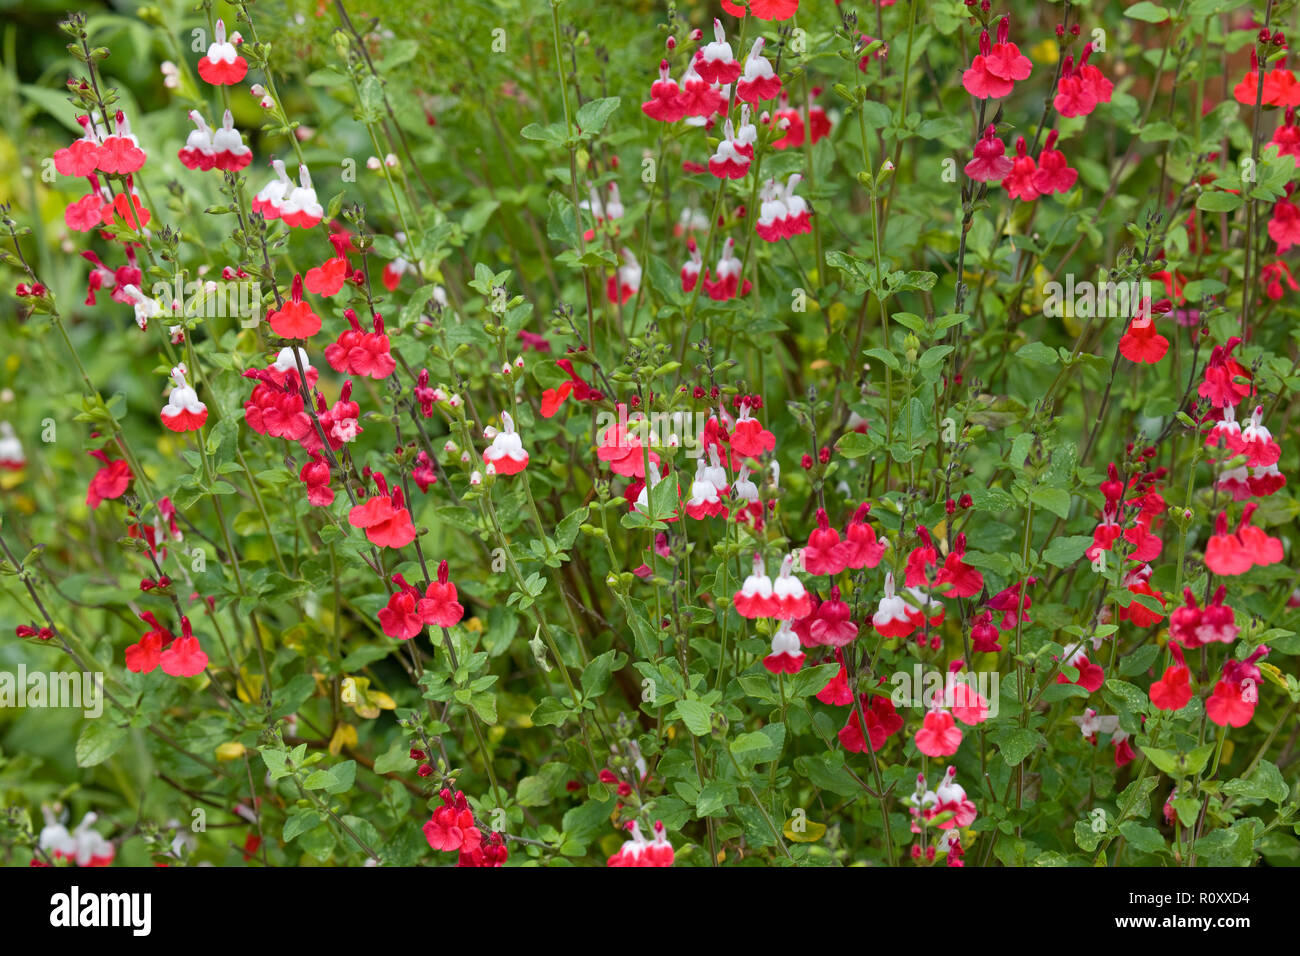 Salvia microphylla Hot Lips flowering plant Stock Photo